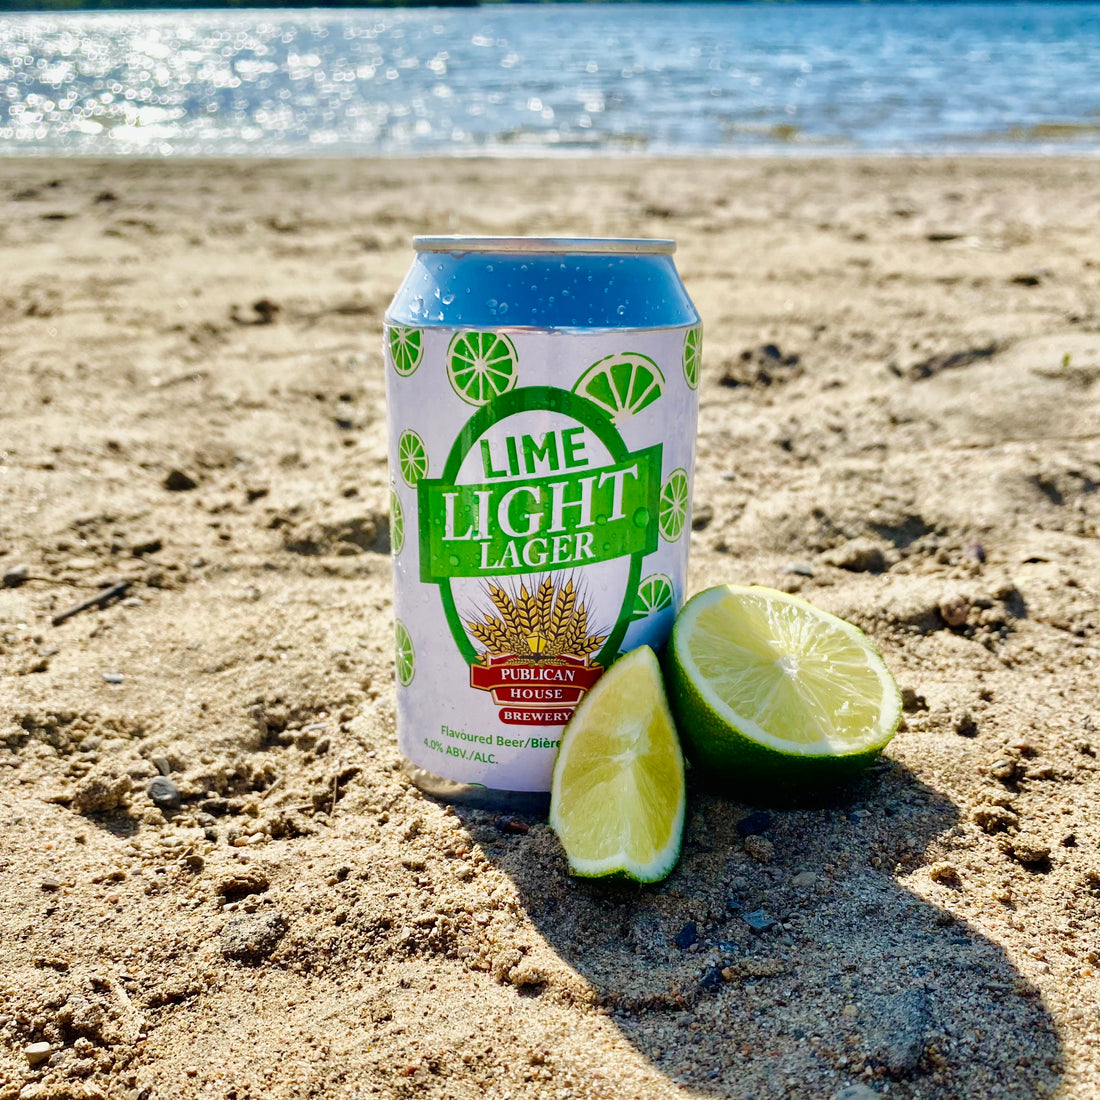 Introducing Lime Light Lager!